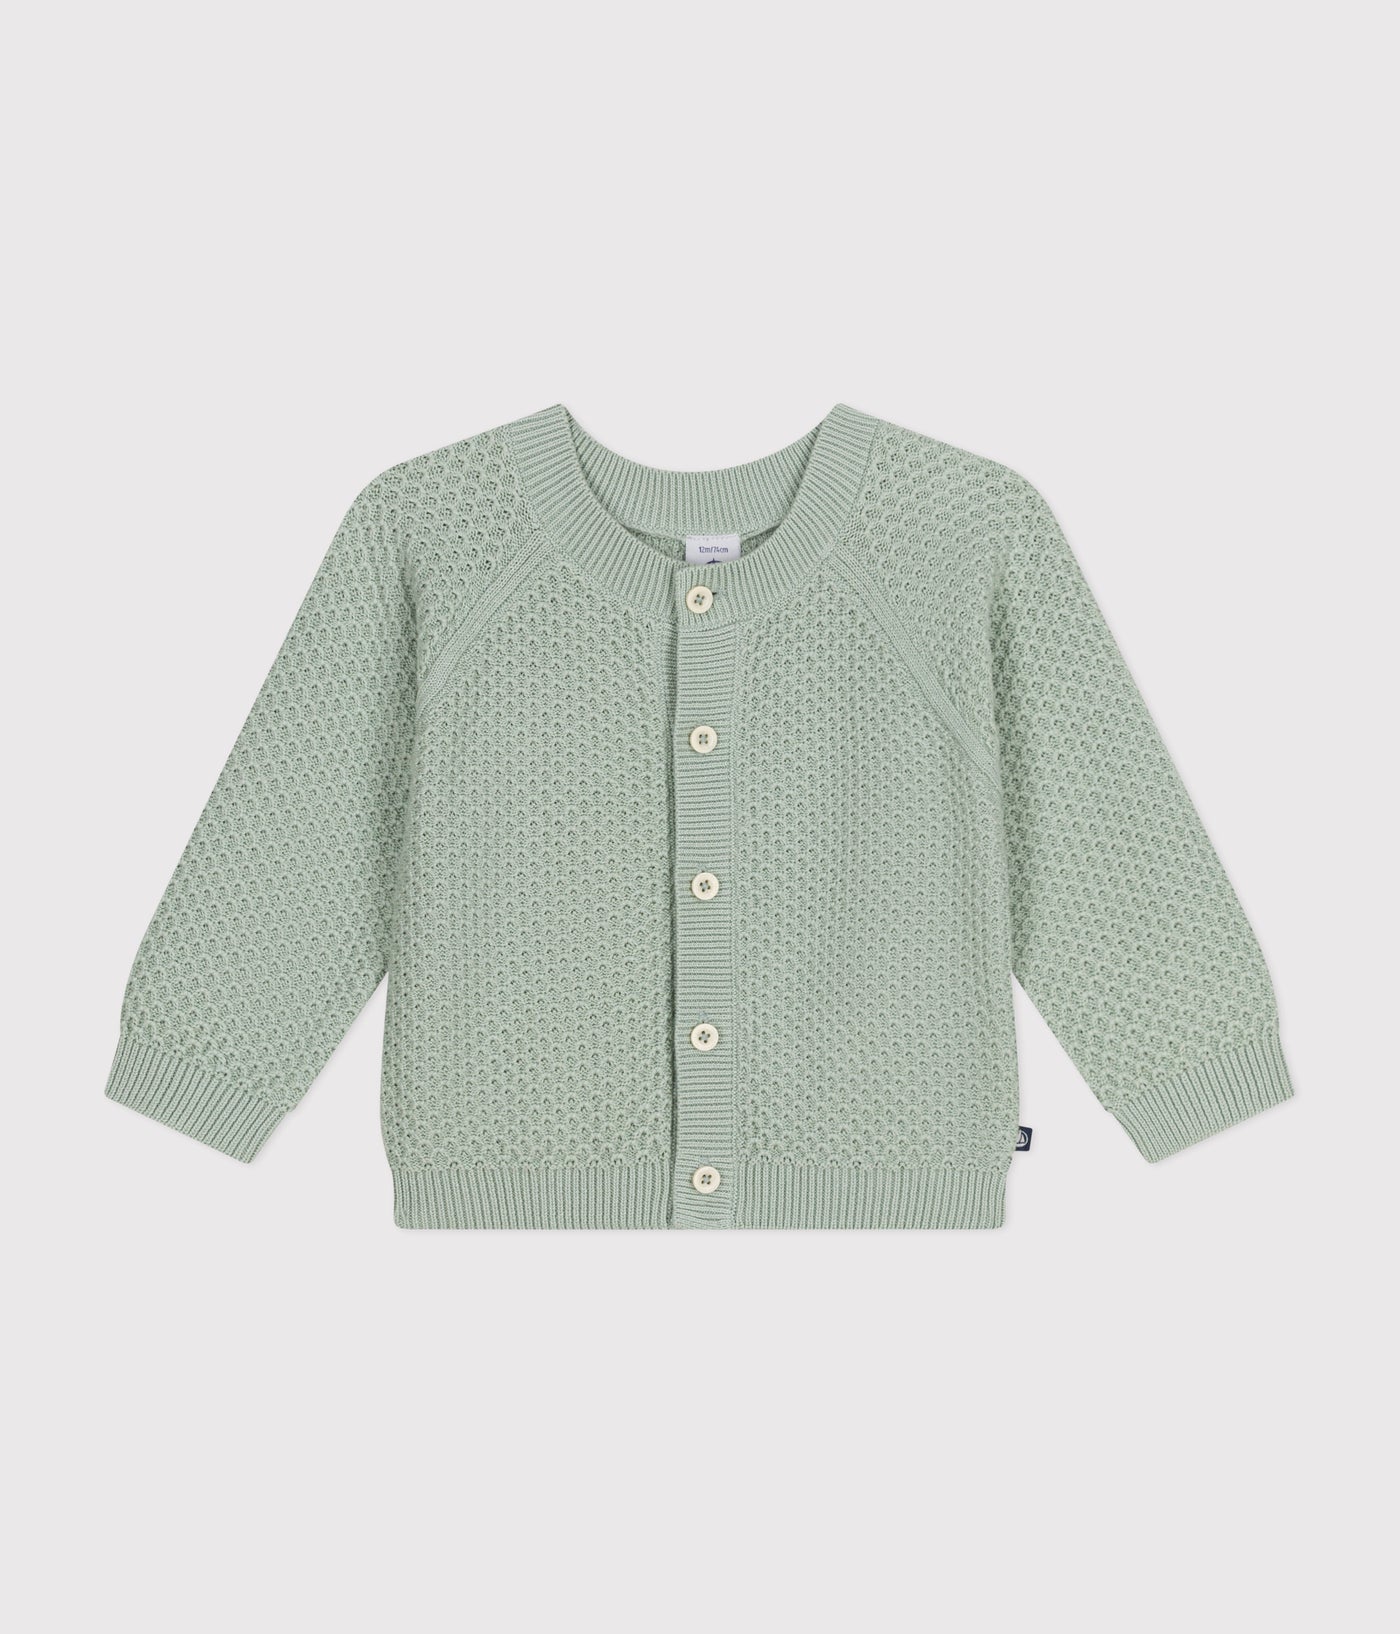 BABIES' KNITTED COTTON CARDIGAN